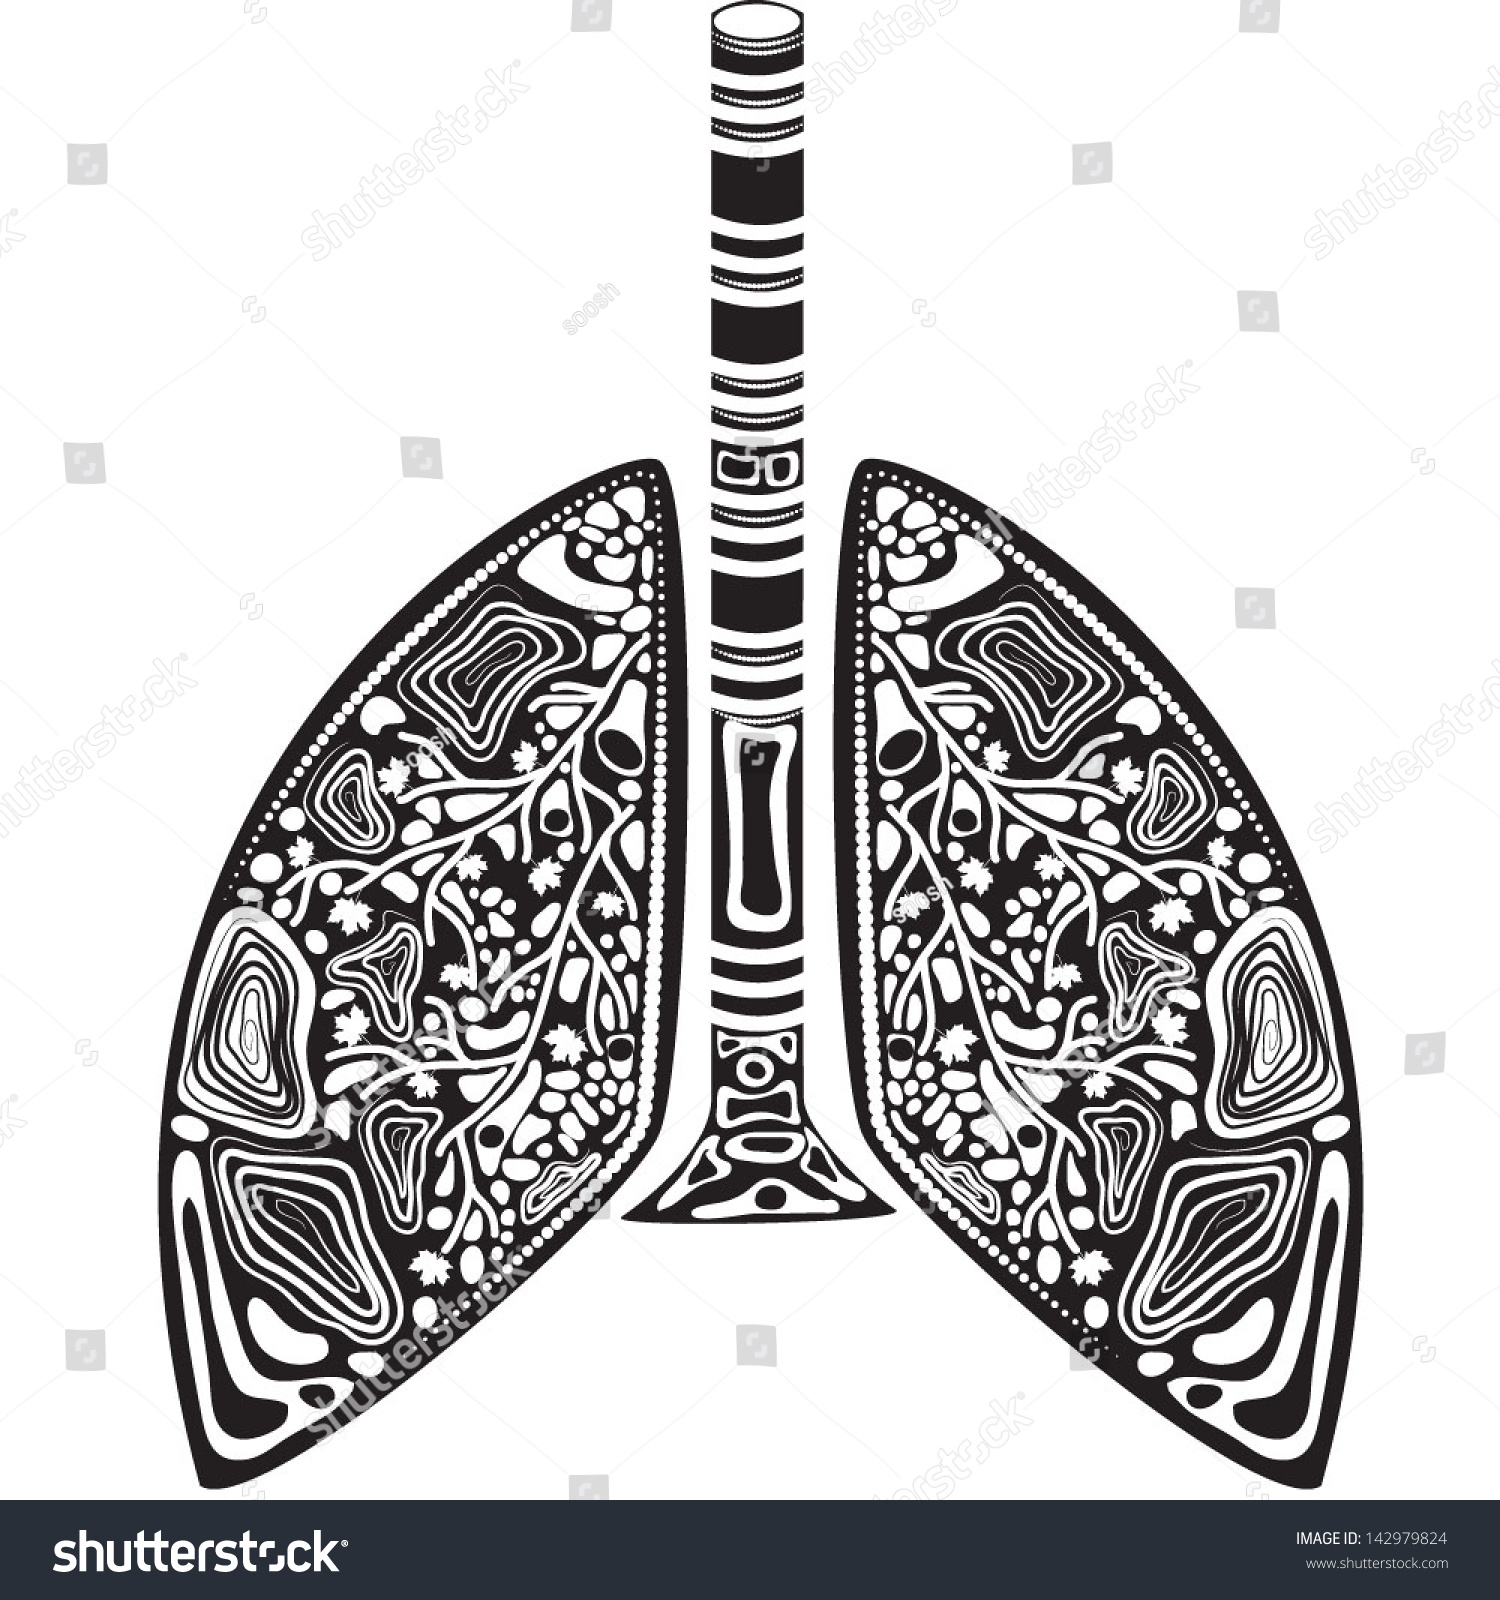 lungs clipart vector - photo #15